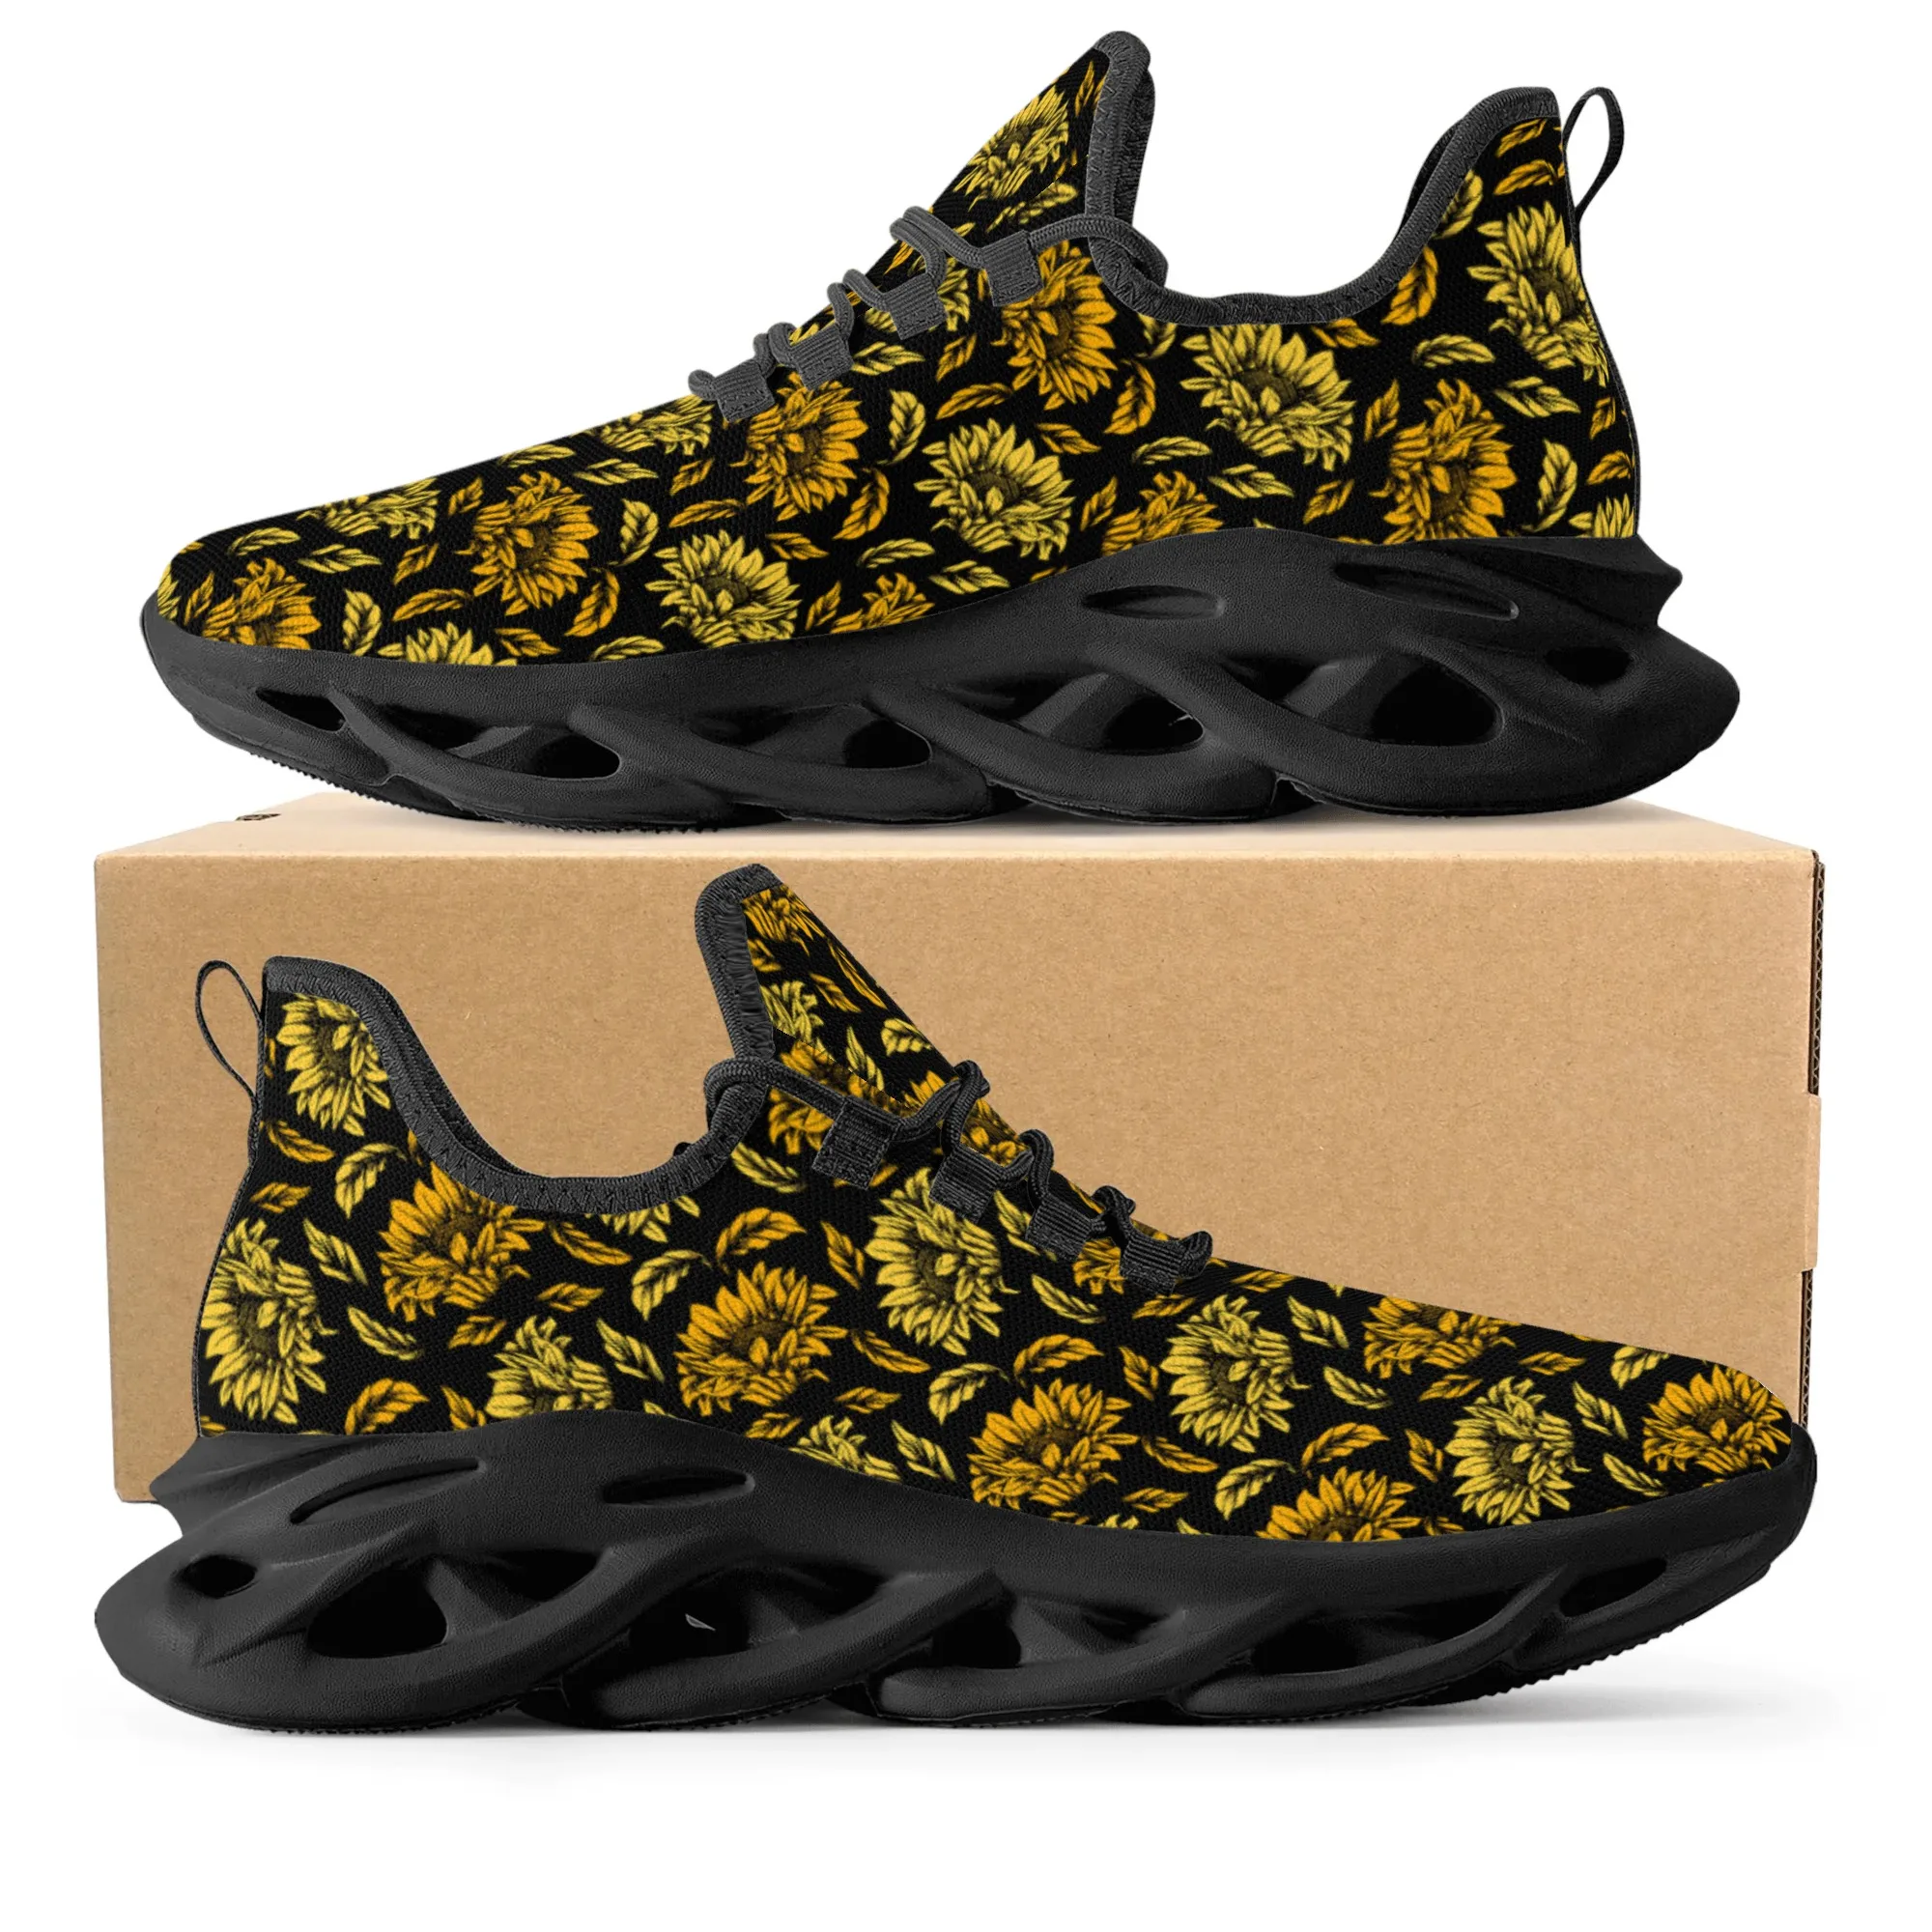 Sunflowers Print Design Fashion Funny Sneakers Men Women Teenager Breathable Mesh Casual Running Shoes Lace-Up Basketball Shoe sunflowers print design fashion funny sneakers men women teenager breathable mesh casual running shoes lace up basketball shoe